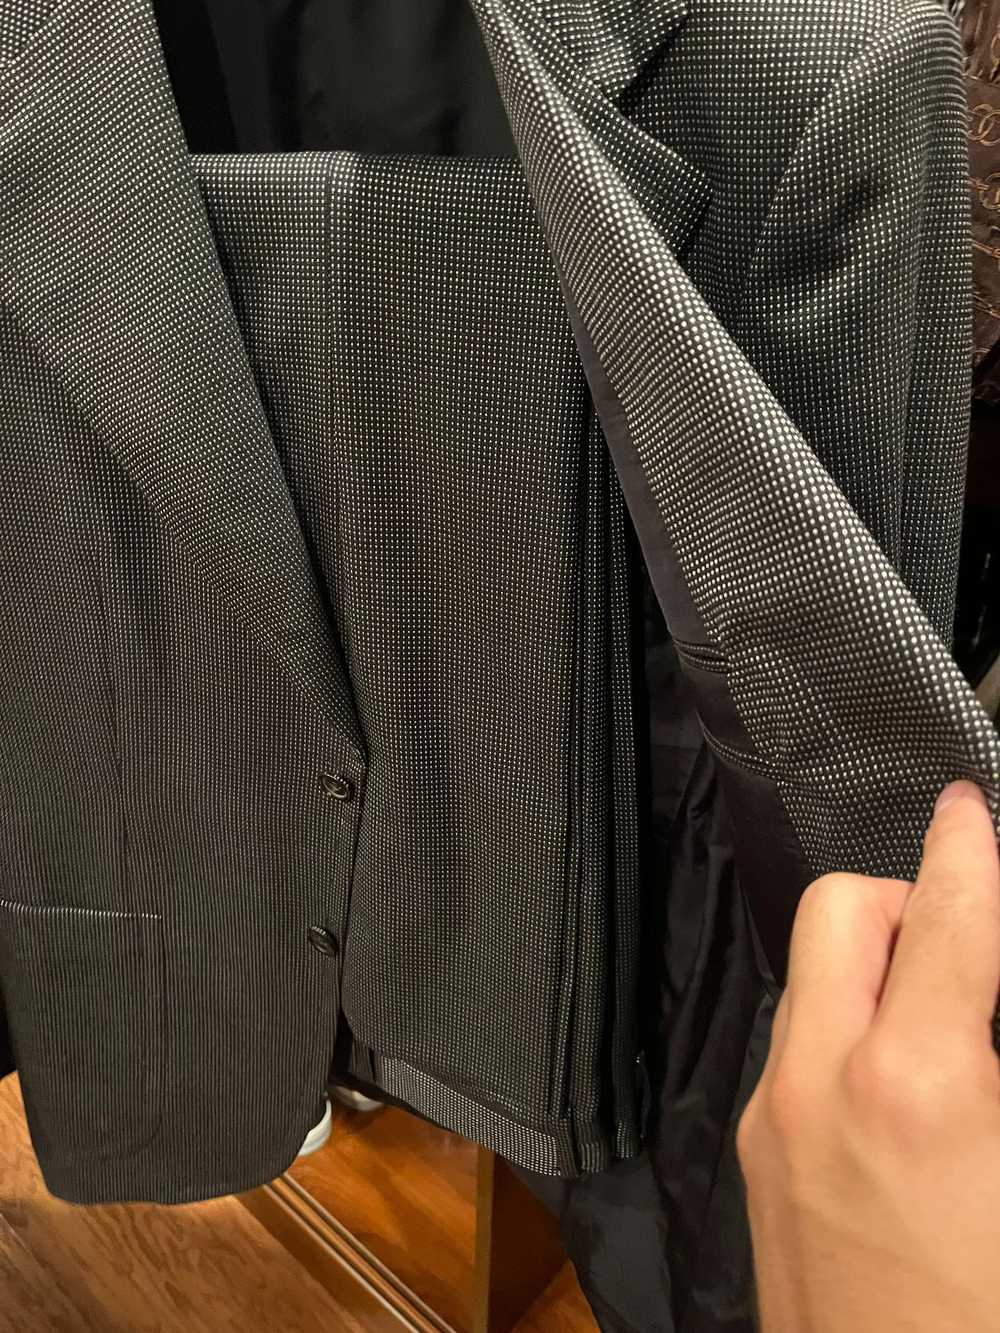 Gucci × Tom Ford Suits in Grey - image 7